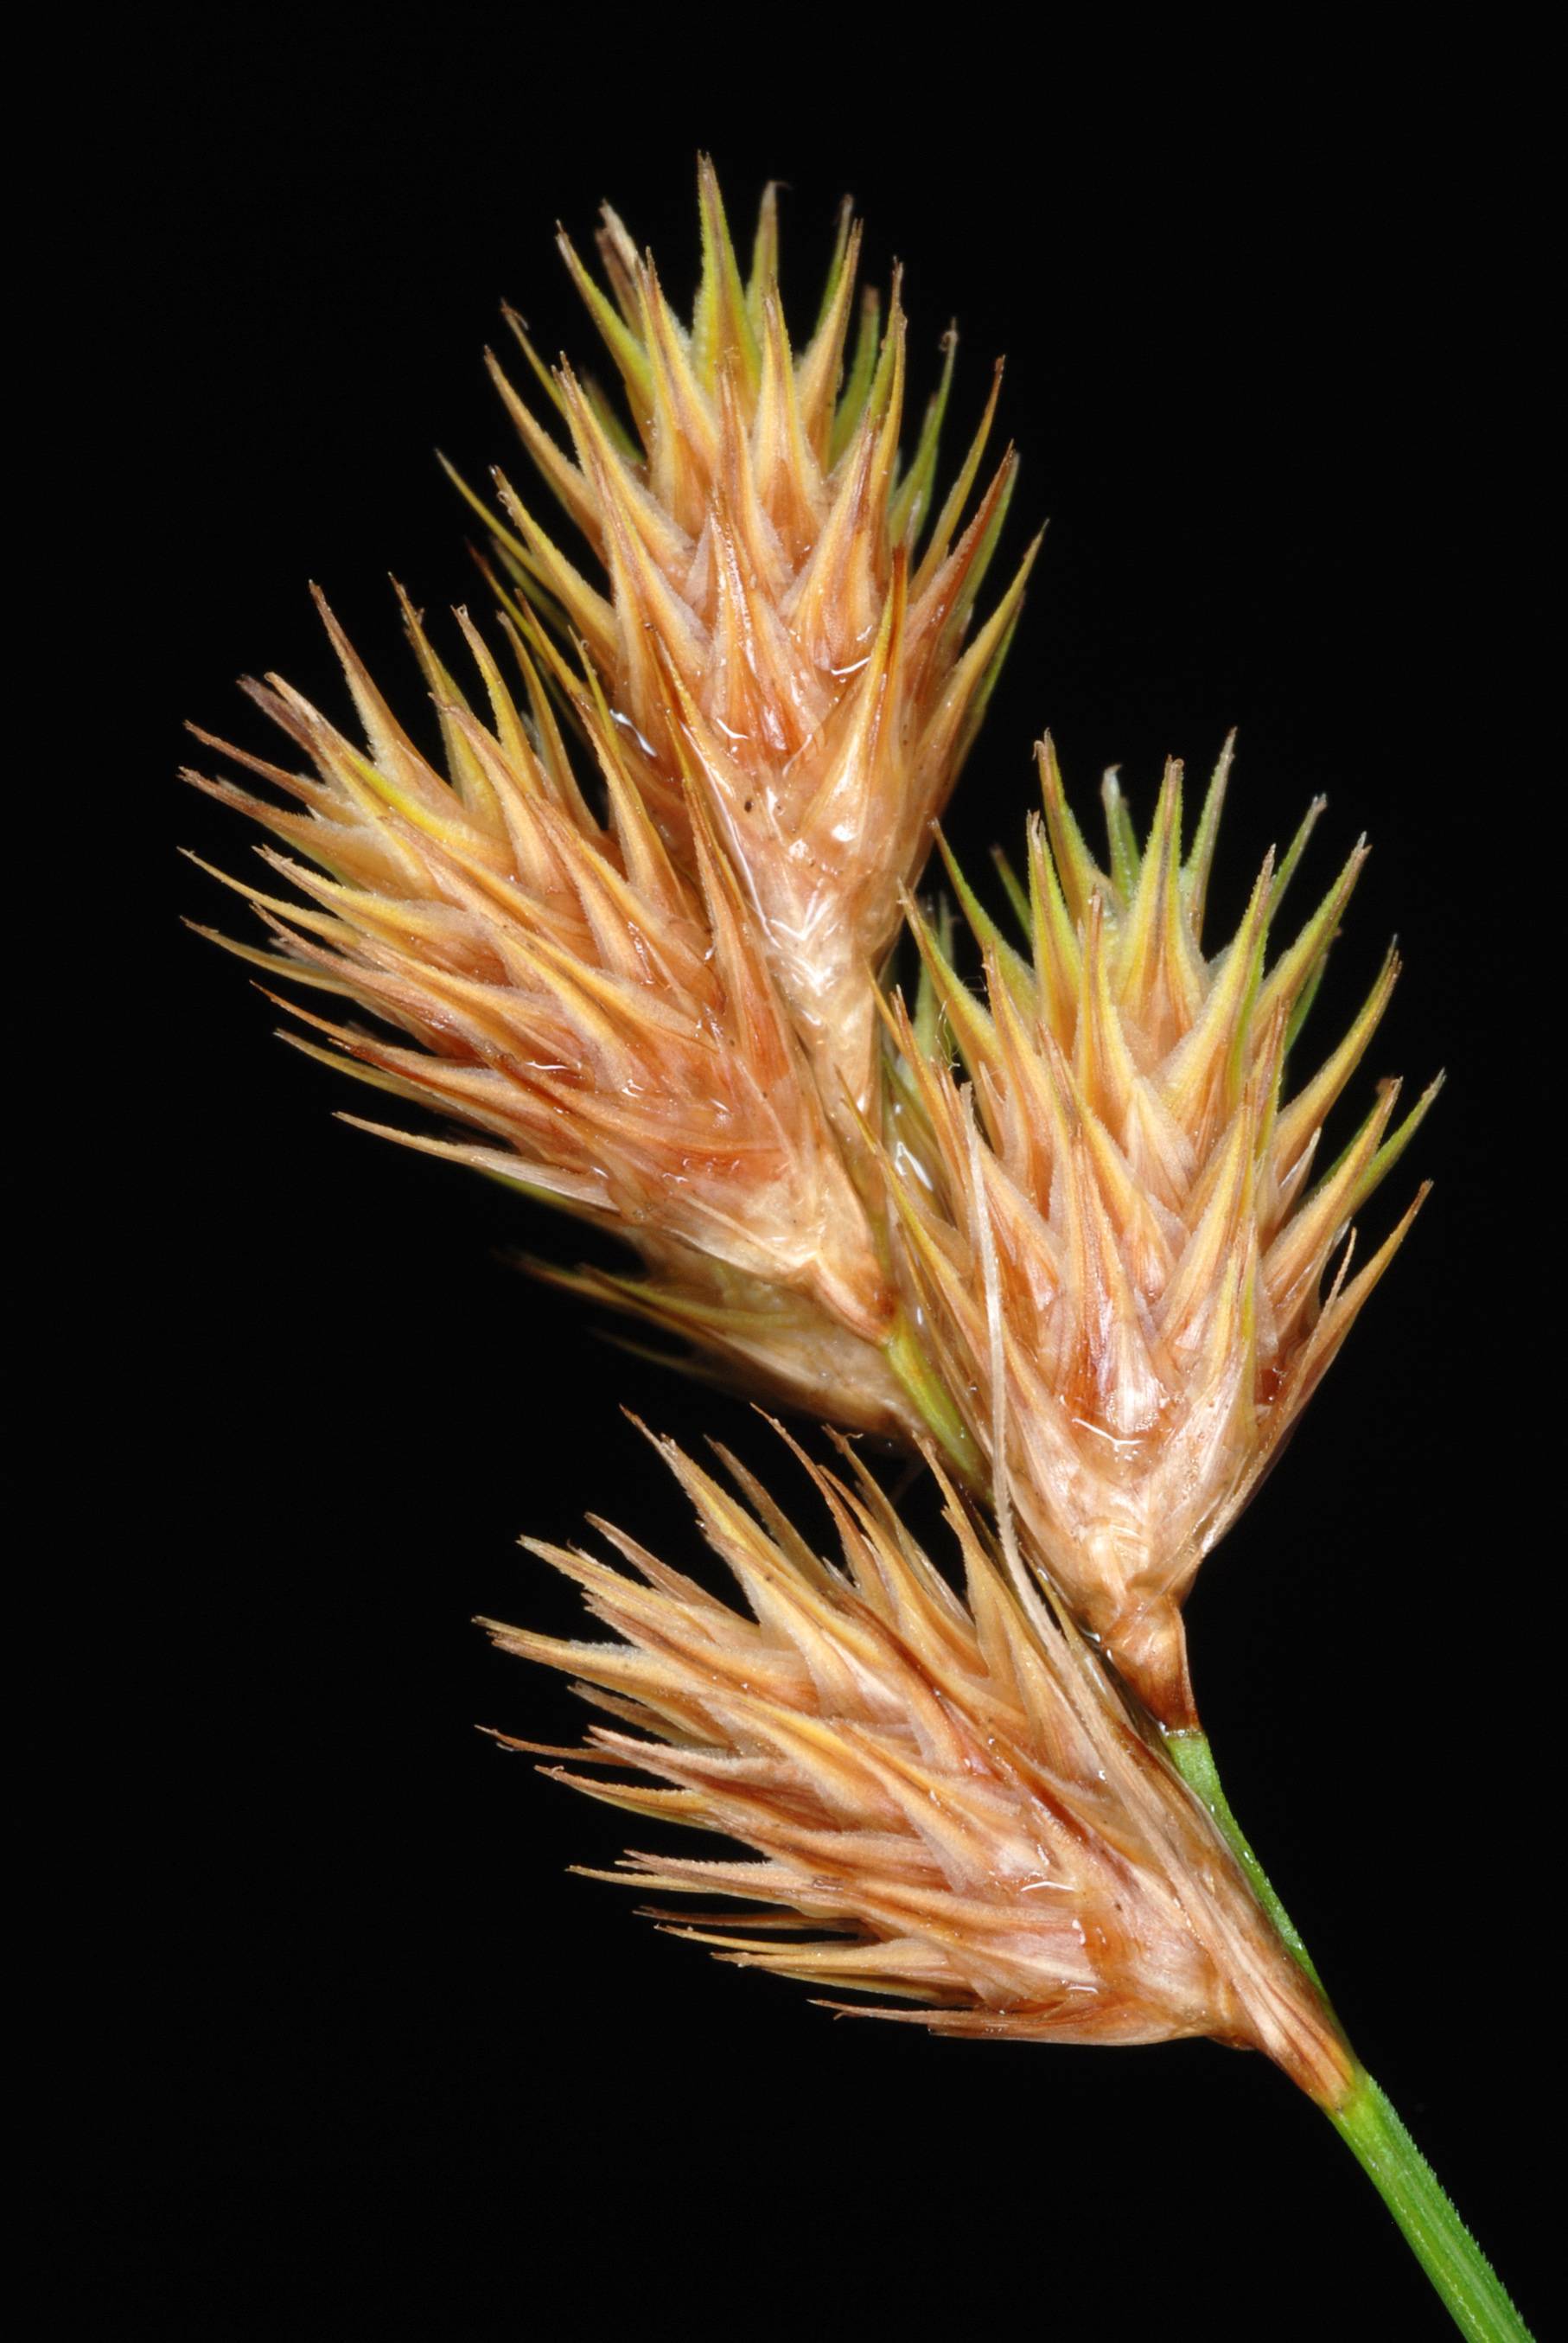 orange-brown spikelets with green foliage